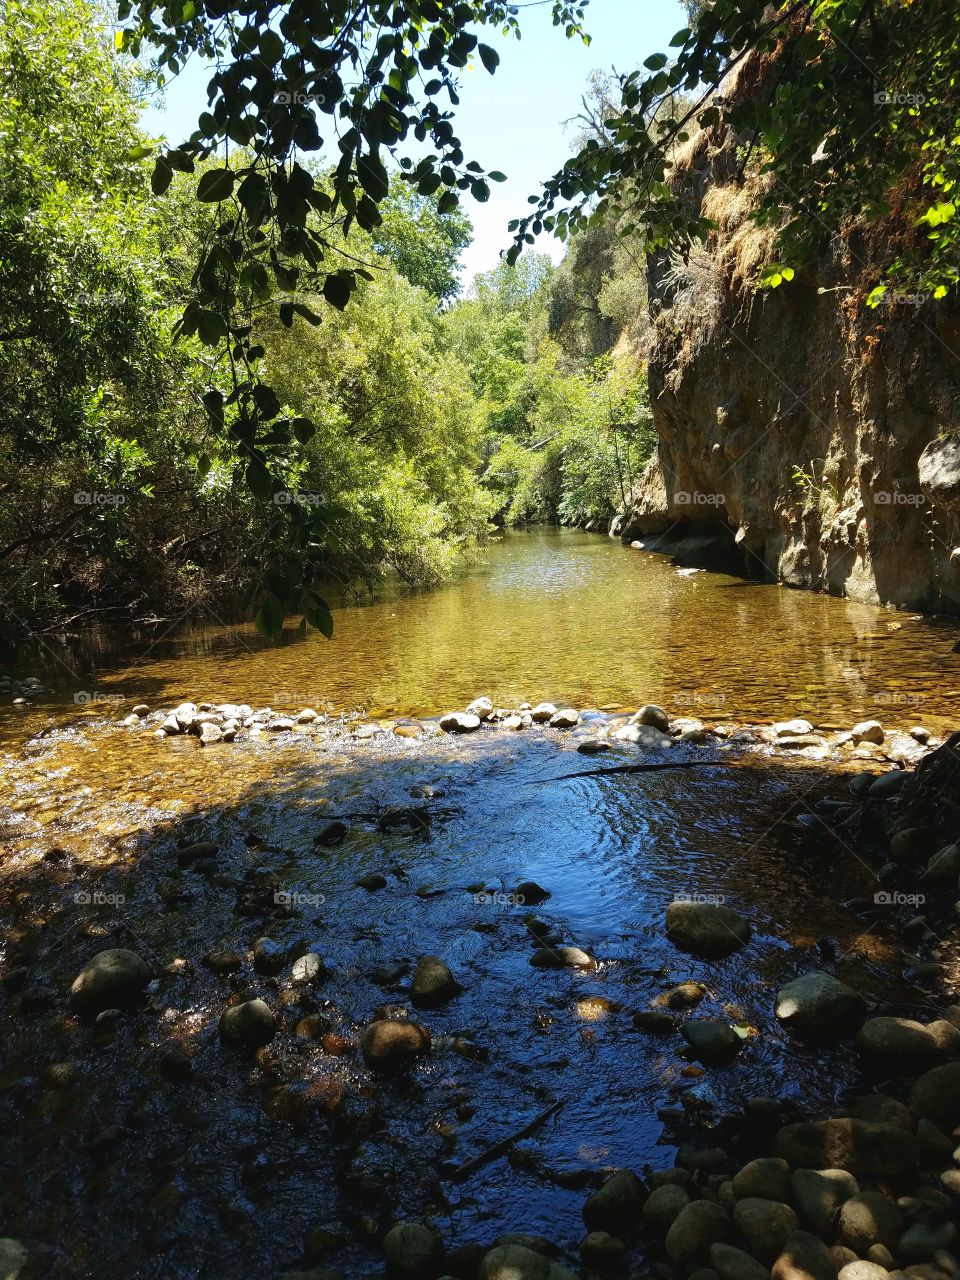 Calm River in a Forest with Trees and Rocks on a Sunny Day